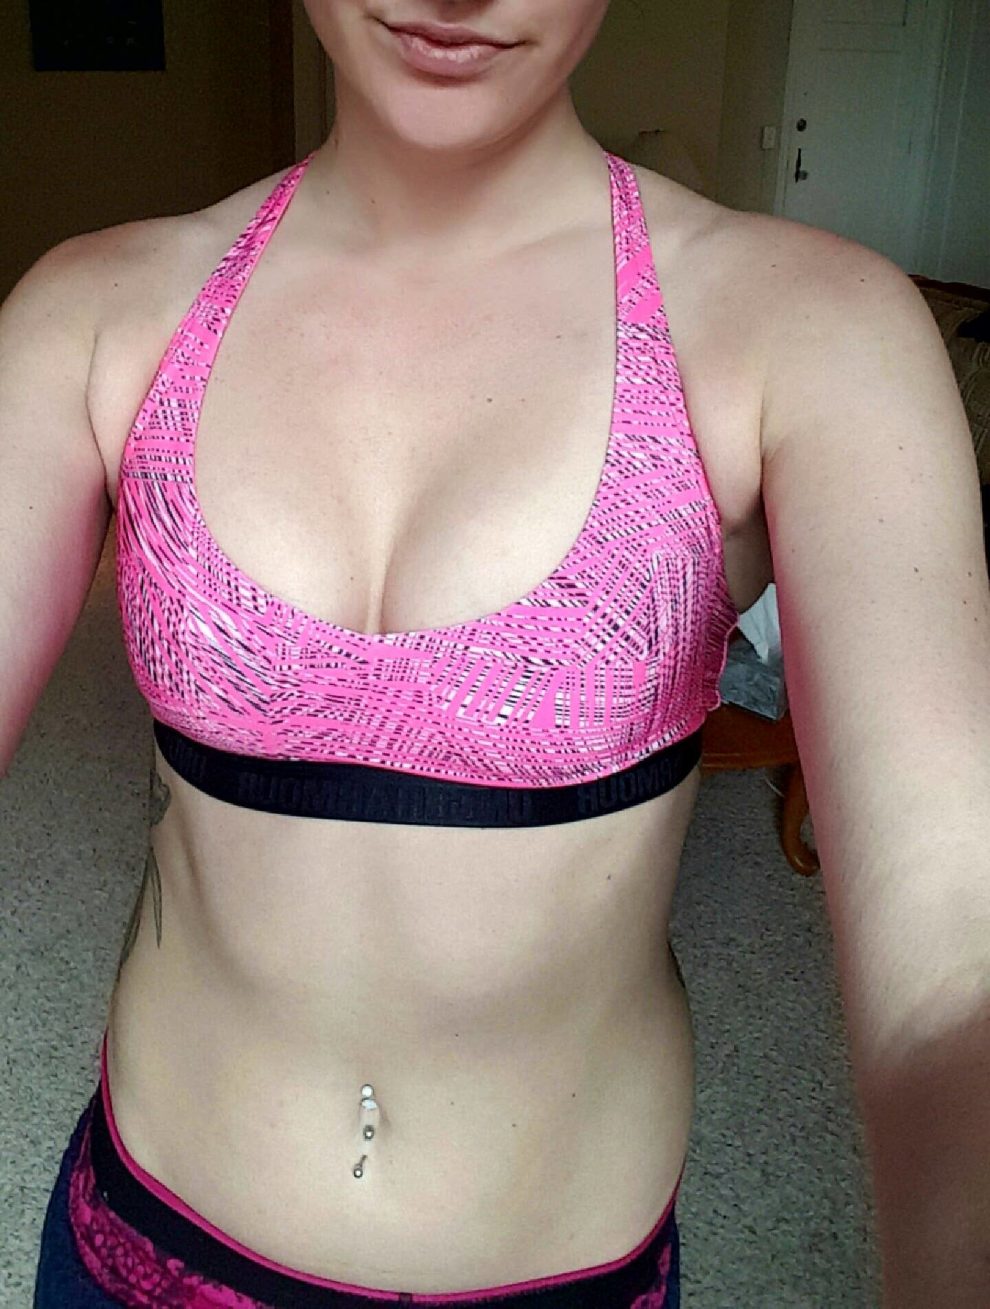 I'd say the gym has been successful lately. What do you think?